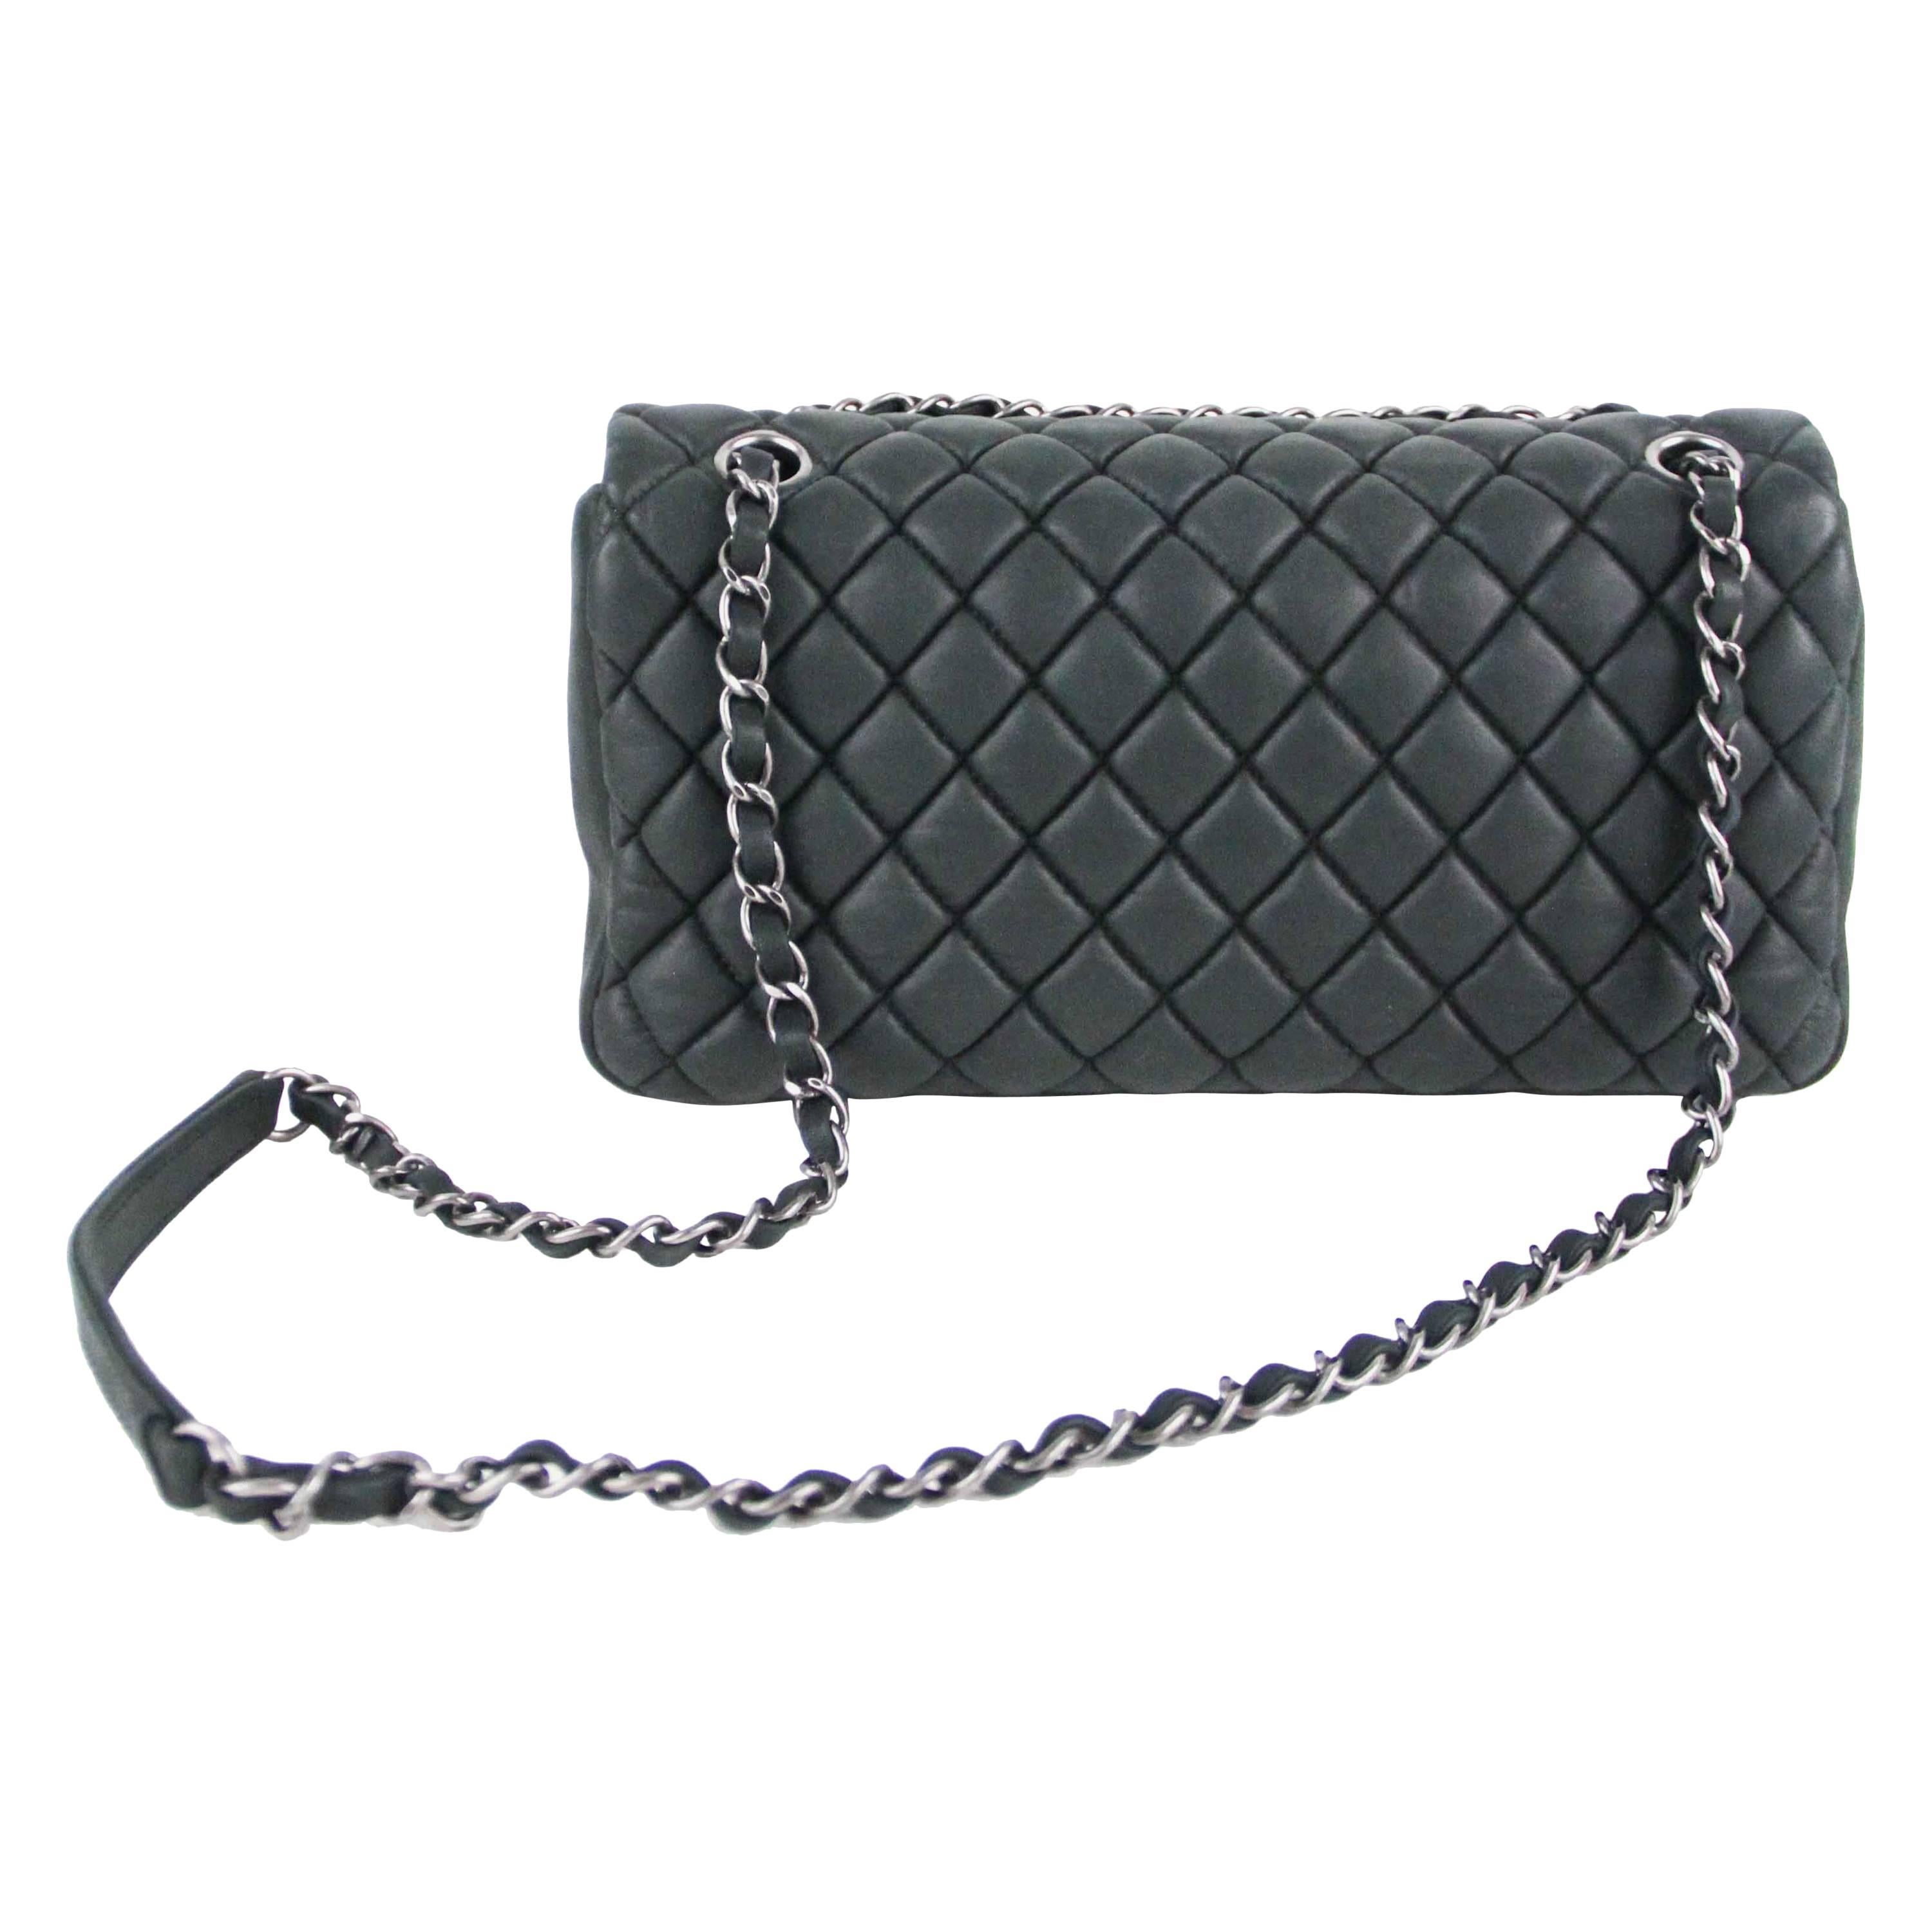 Offered is a Chanel glazed calfskin medium bubble flap shoulder bag.  Beautiful treatment and hard to find in this combination, black calfskin complimented by rhodium hardware.  Long chain link shoulder strap with a flat leather piece at shoulder. 